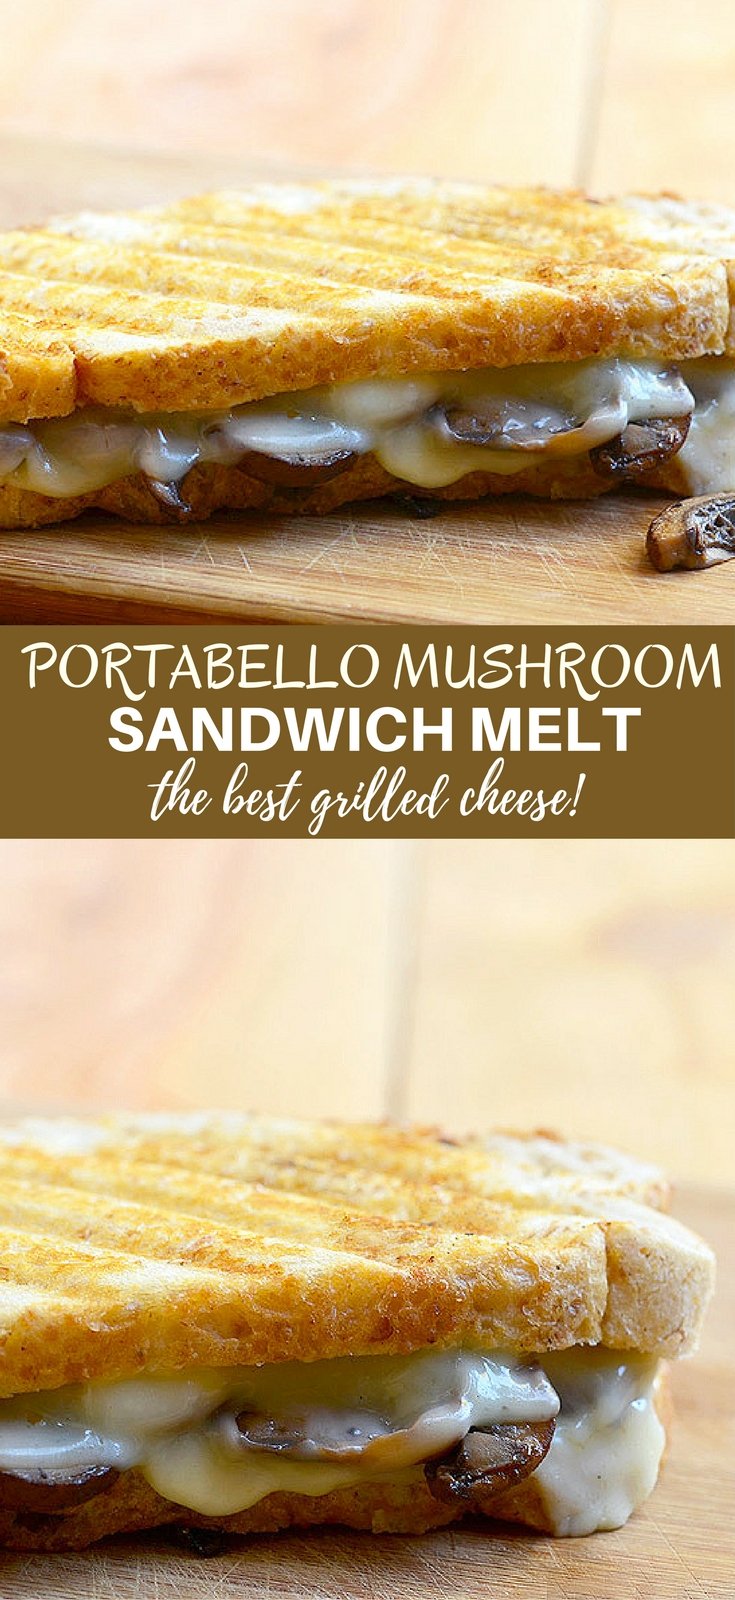 Portabello Mushroom Sandwich Melt with meaty mushrooms and gooey Provolone cheese on toasted French bread is the easiest and tastiest sandwich you can make! Perfect for a midday snack or light lunch!